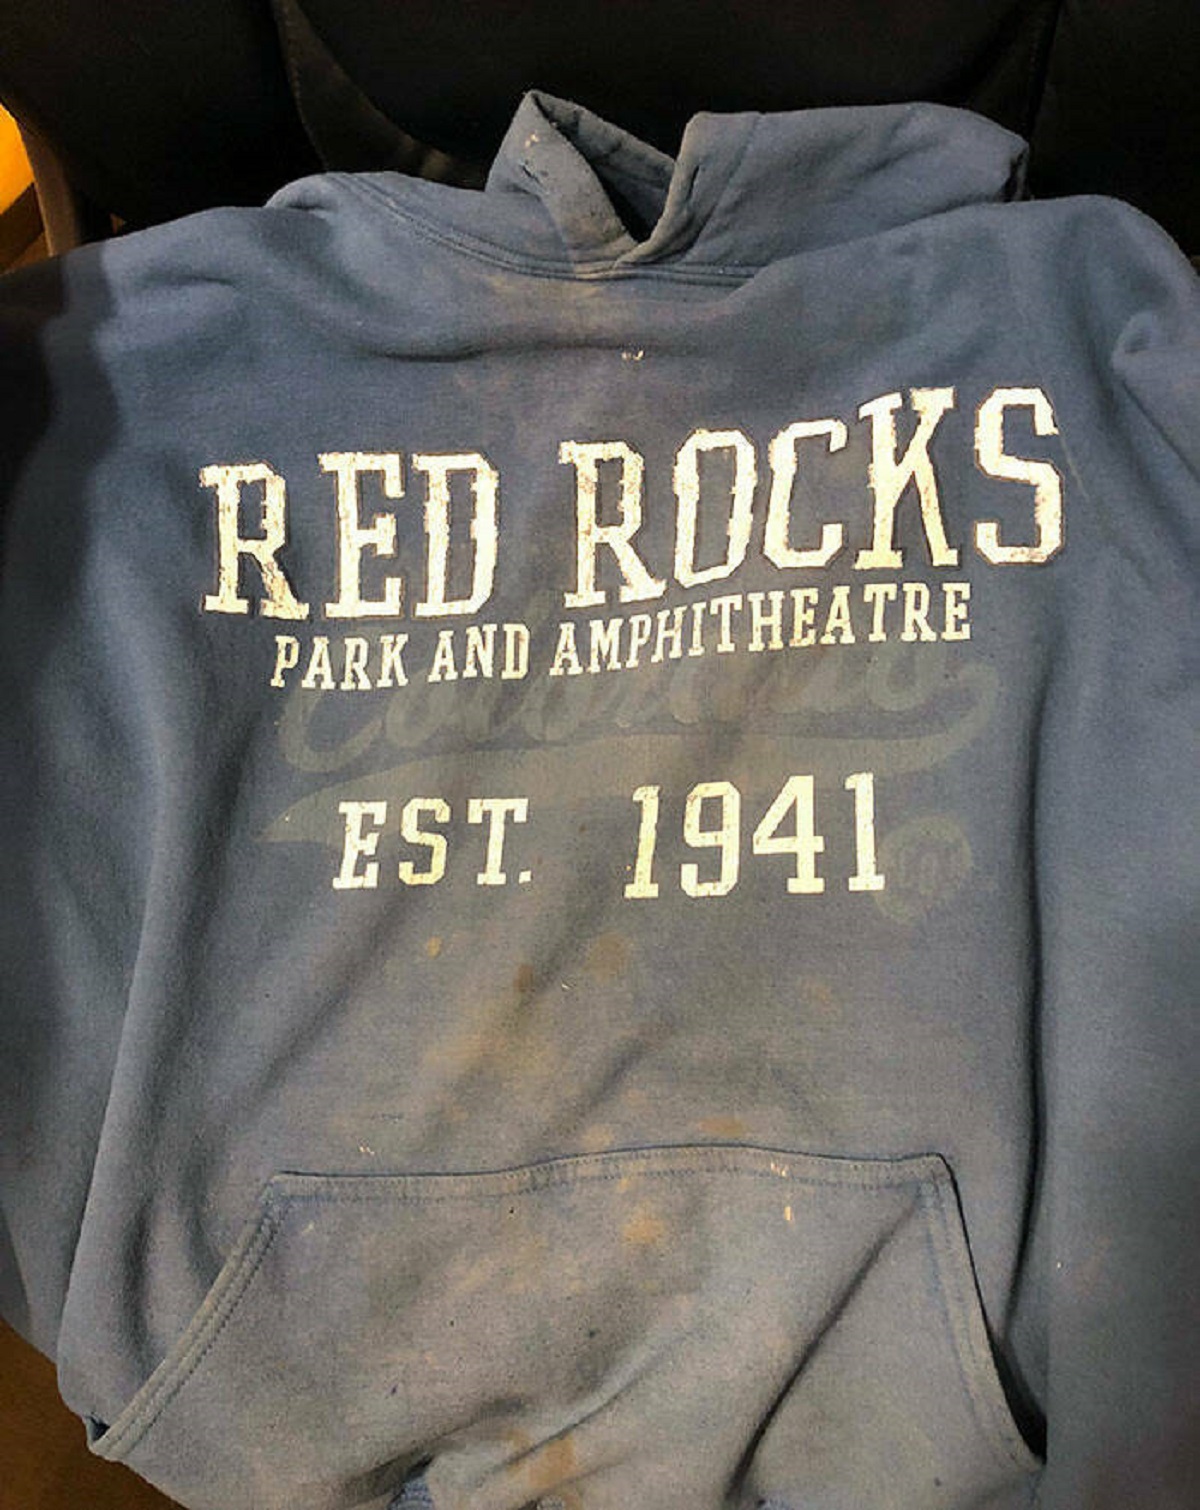 "After 4 Years Of Wearing This Sweatshirt To Work, A Completely Different Imprint Has Started To Appear Under The Original"